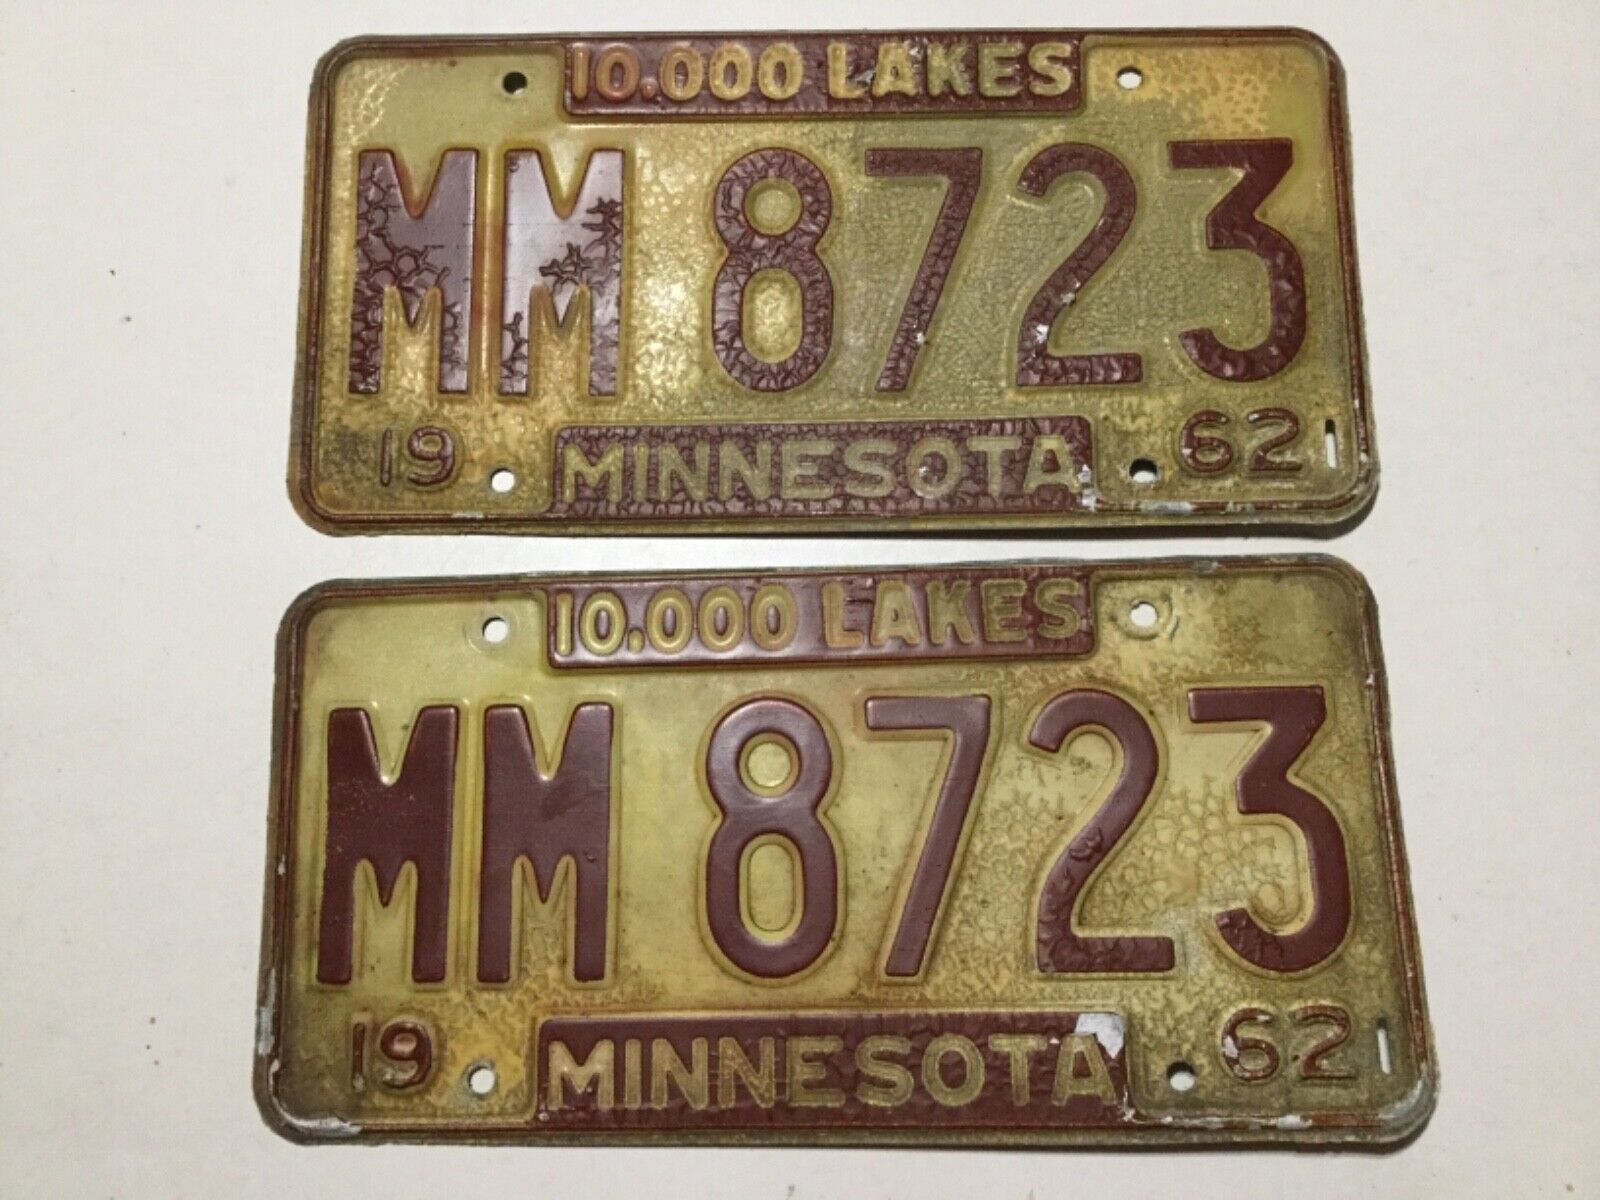 VINTAGE 1962 MN MINNESOTA LICENSE PLATE MATCHED PAIR \